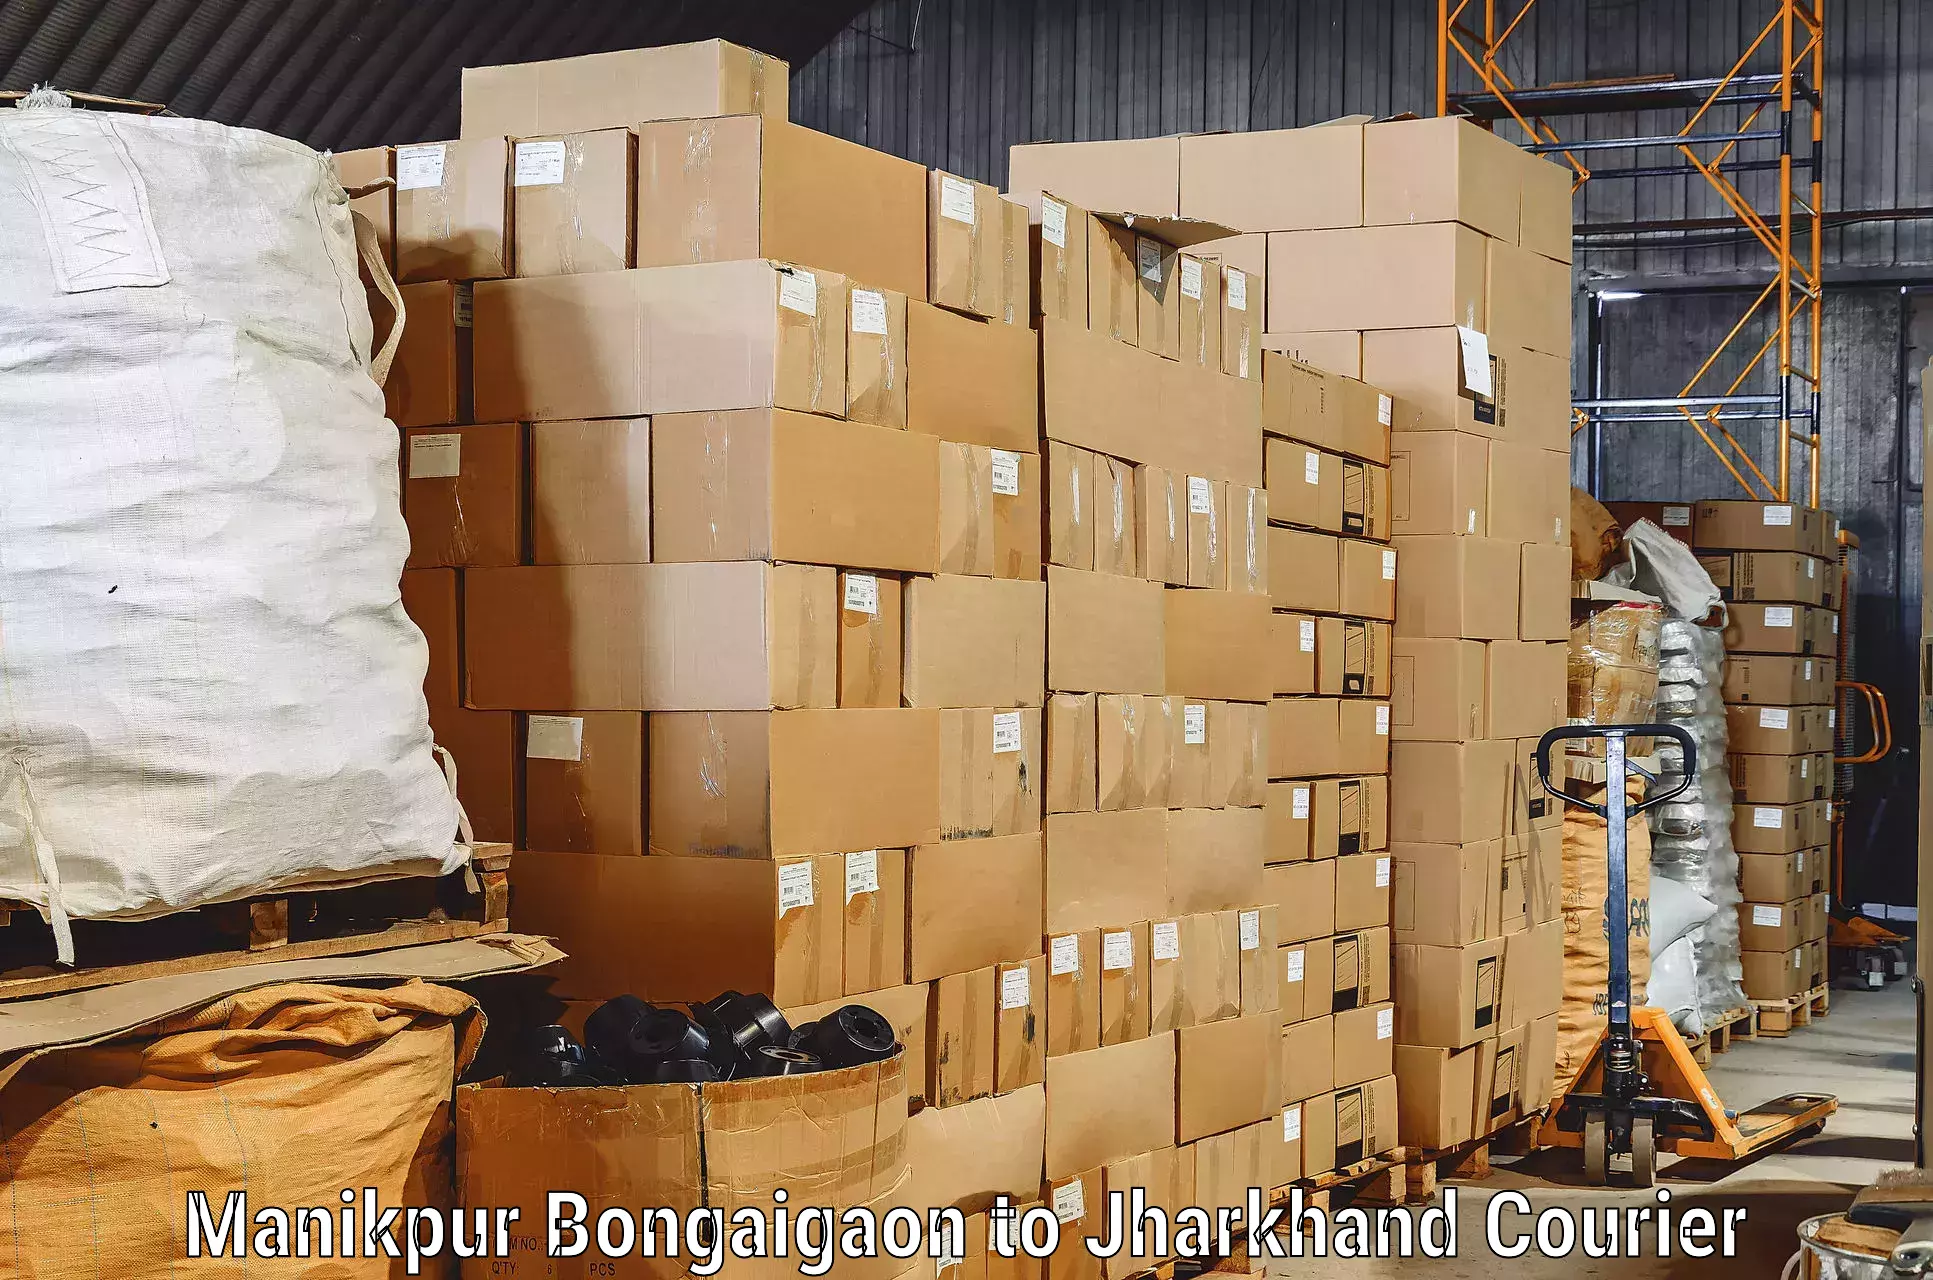 Reliable relocation services in Manikpur Bongaigaon to Gobindpur